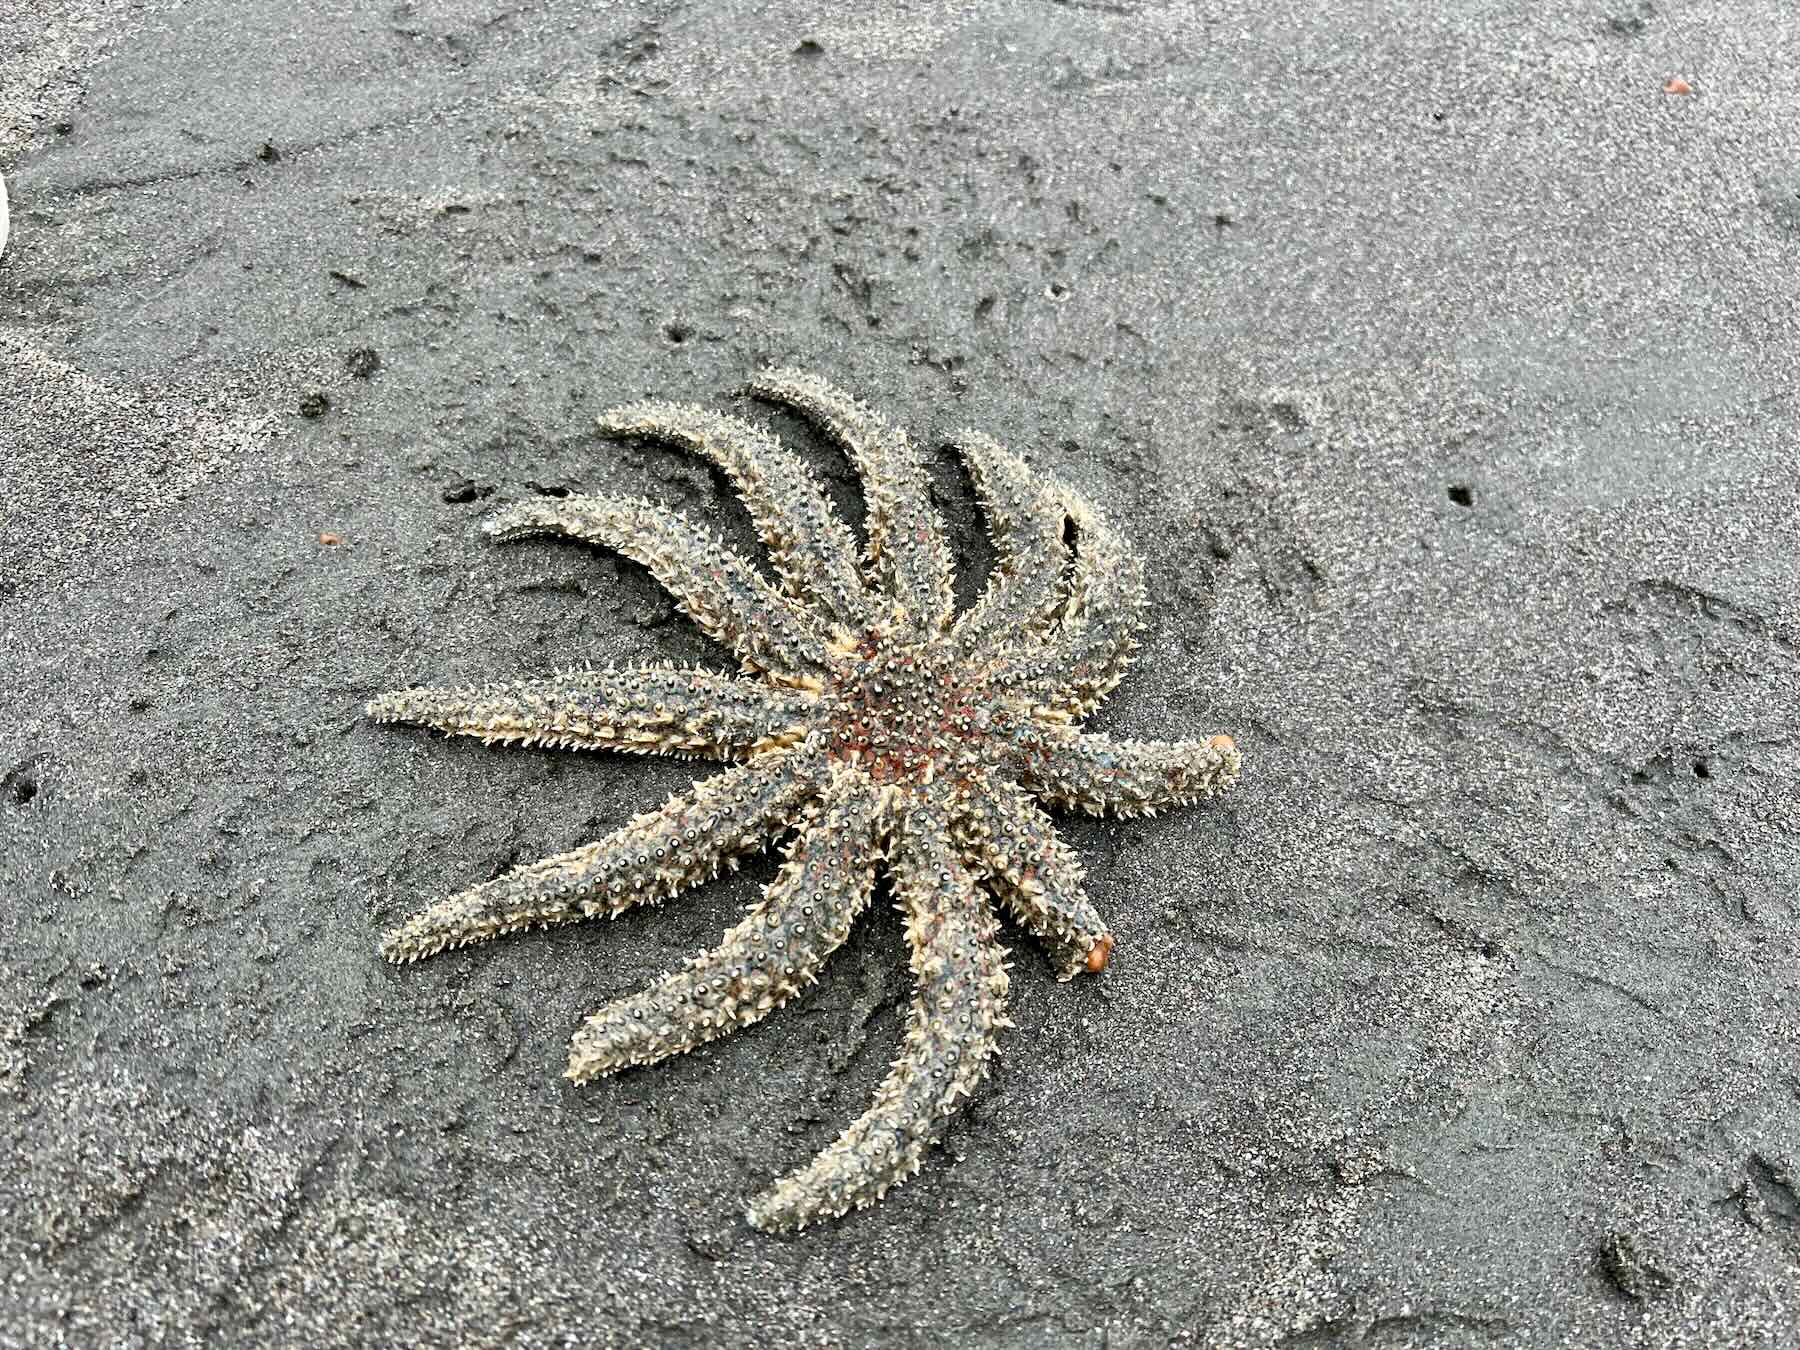 Eleven-Armed Sea Star, with one arm broken and two missing, on sand. 